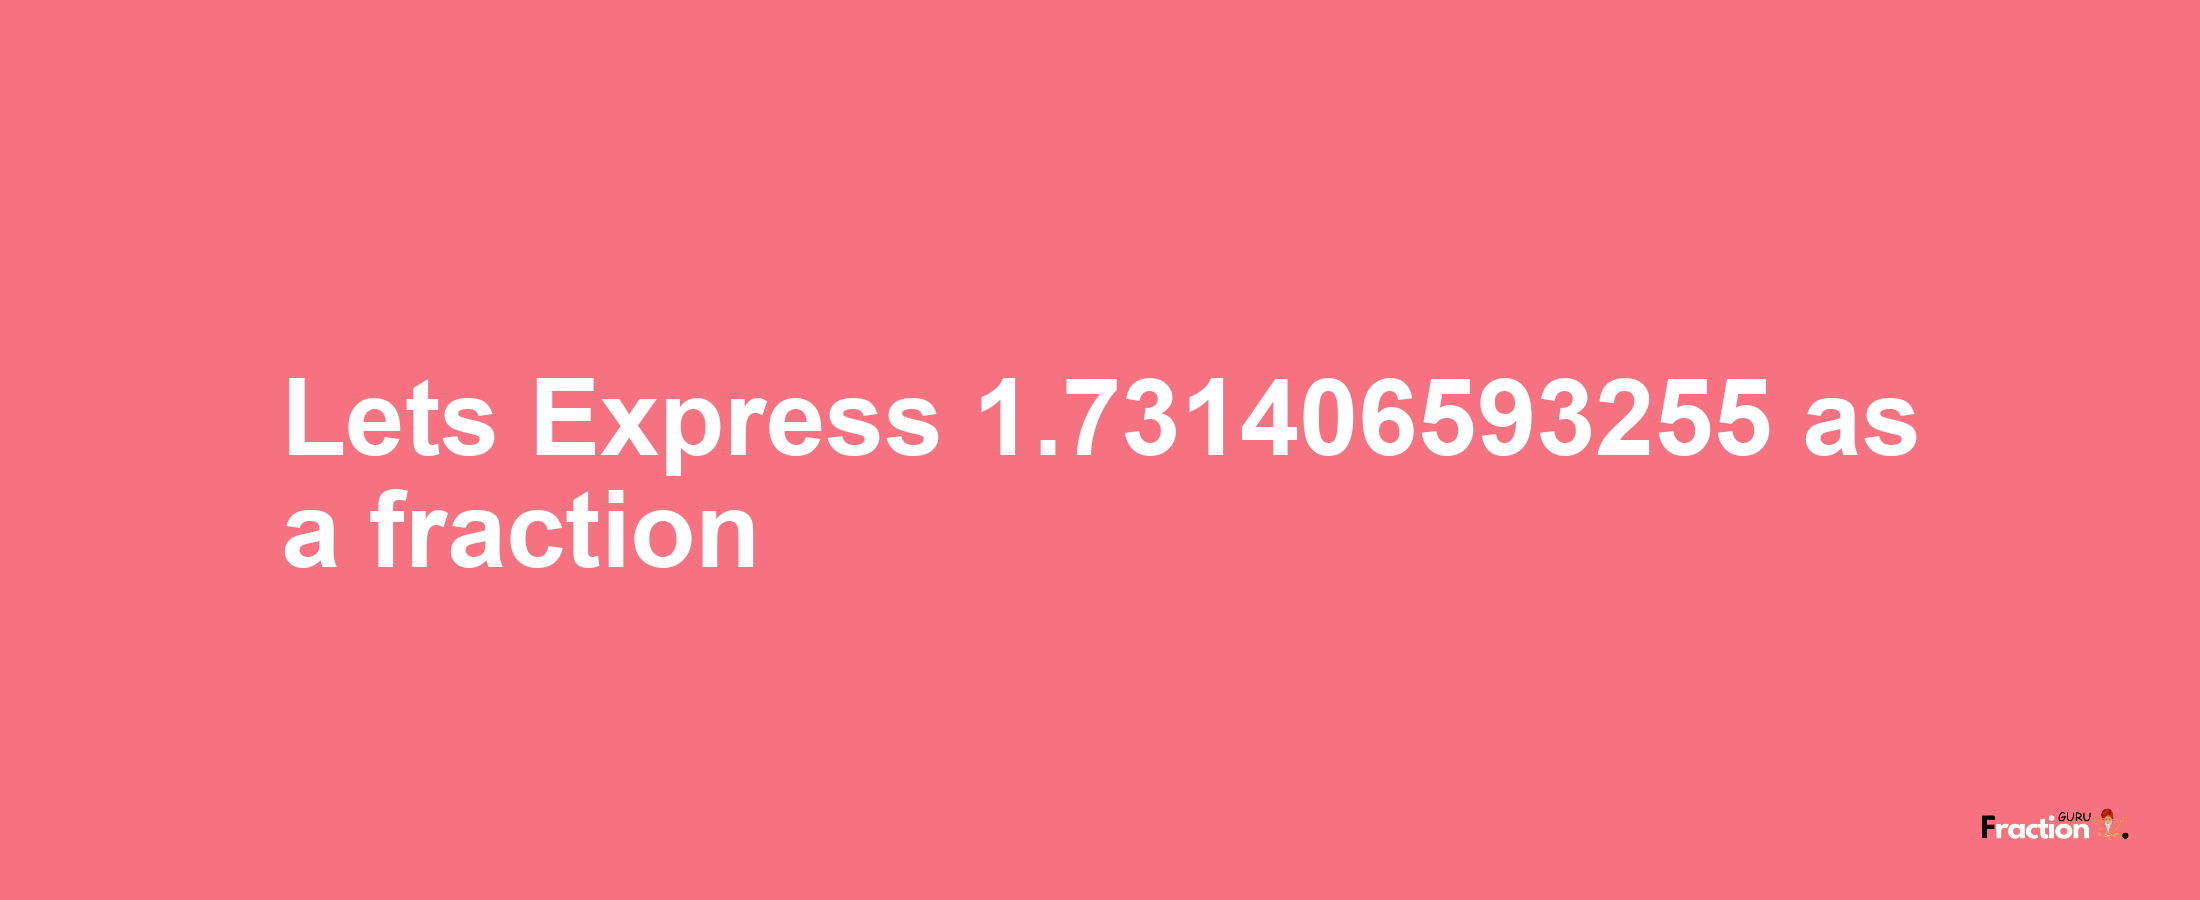 Lets Express 1.731406593255 as afraction